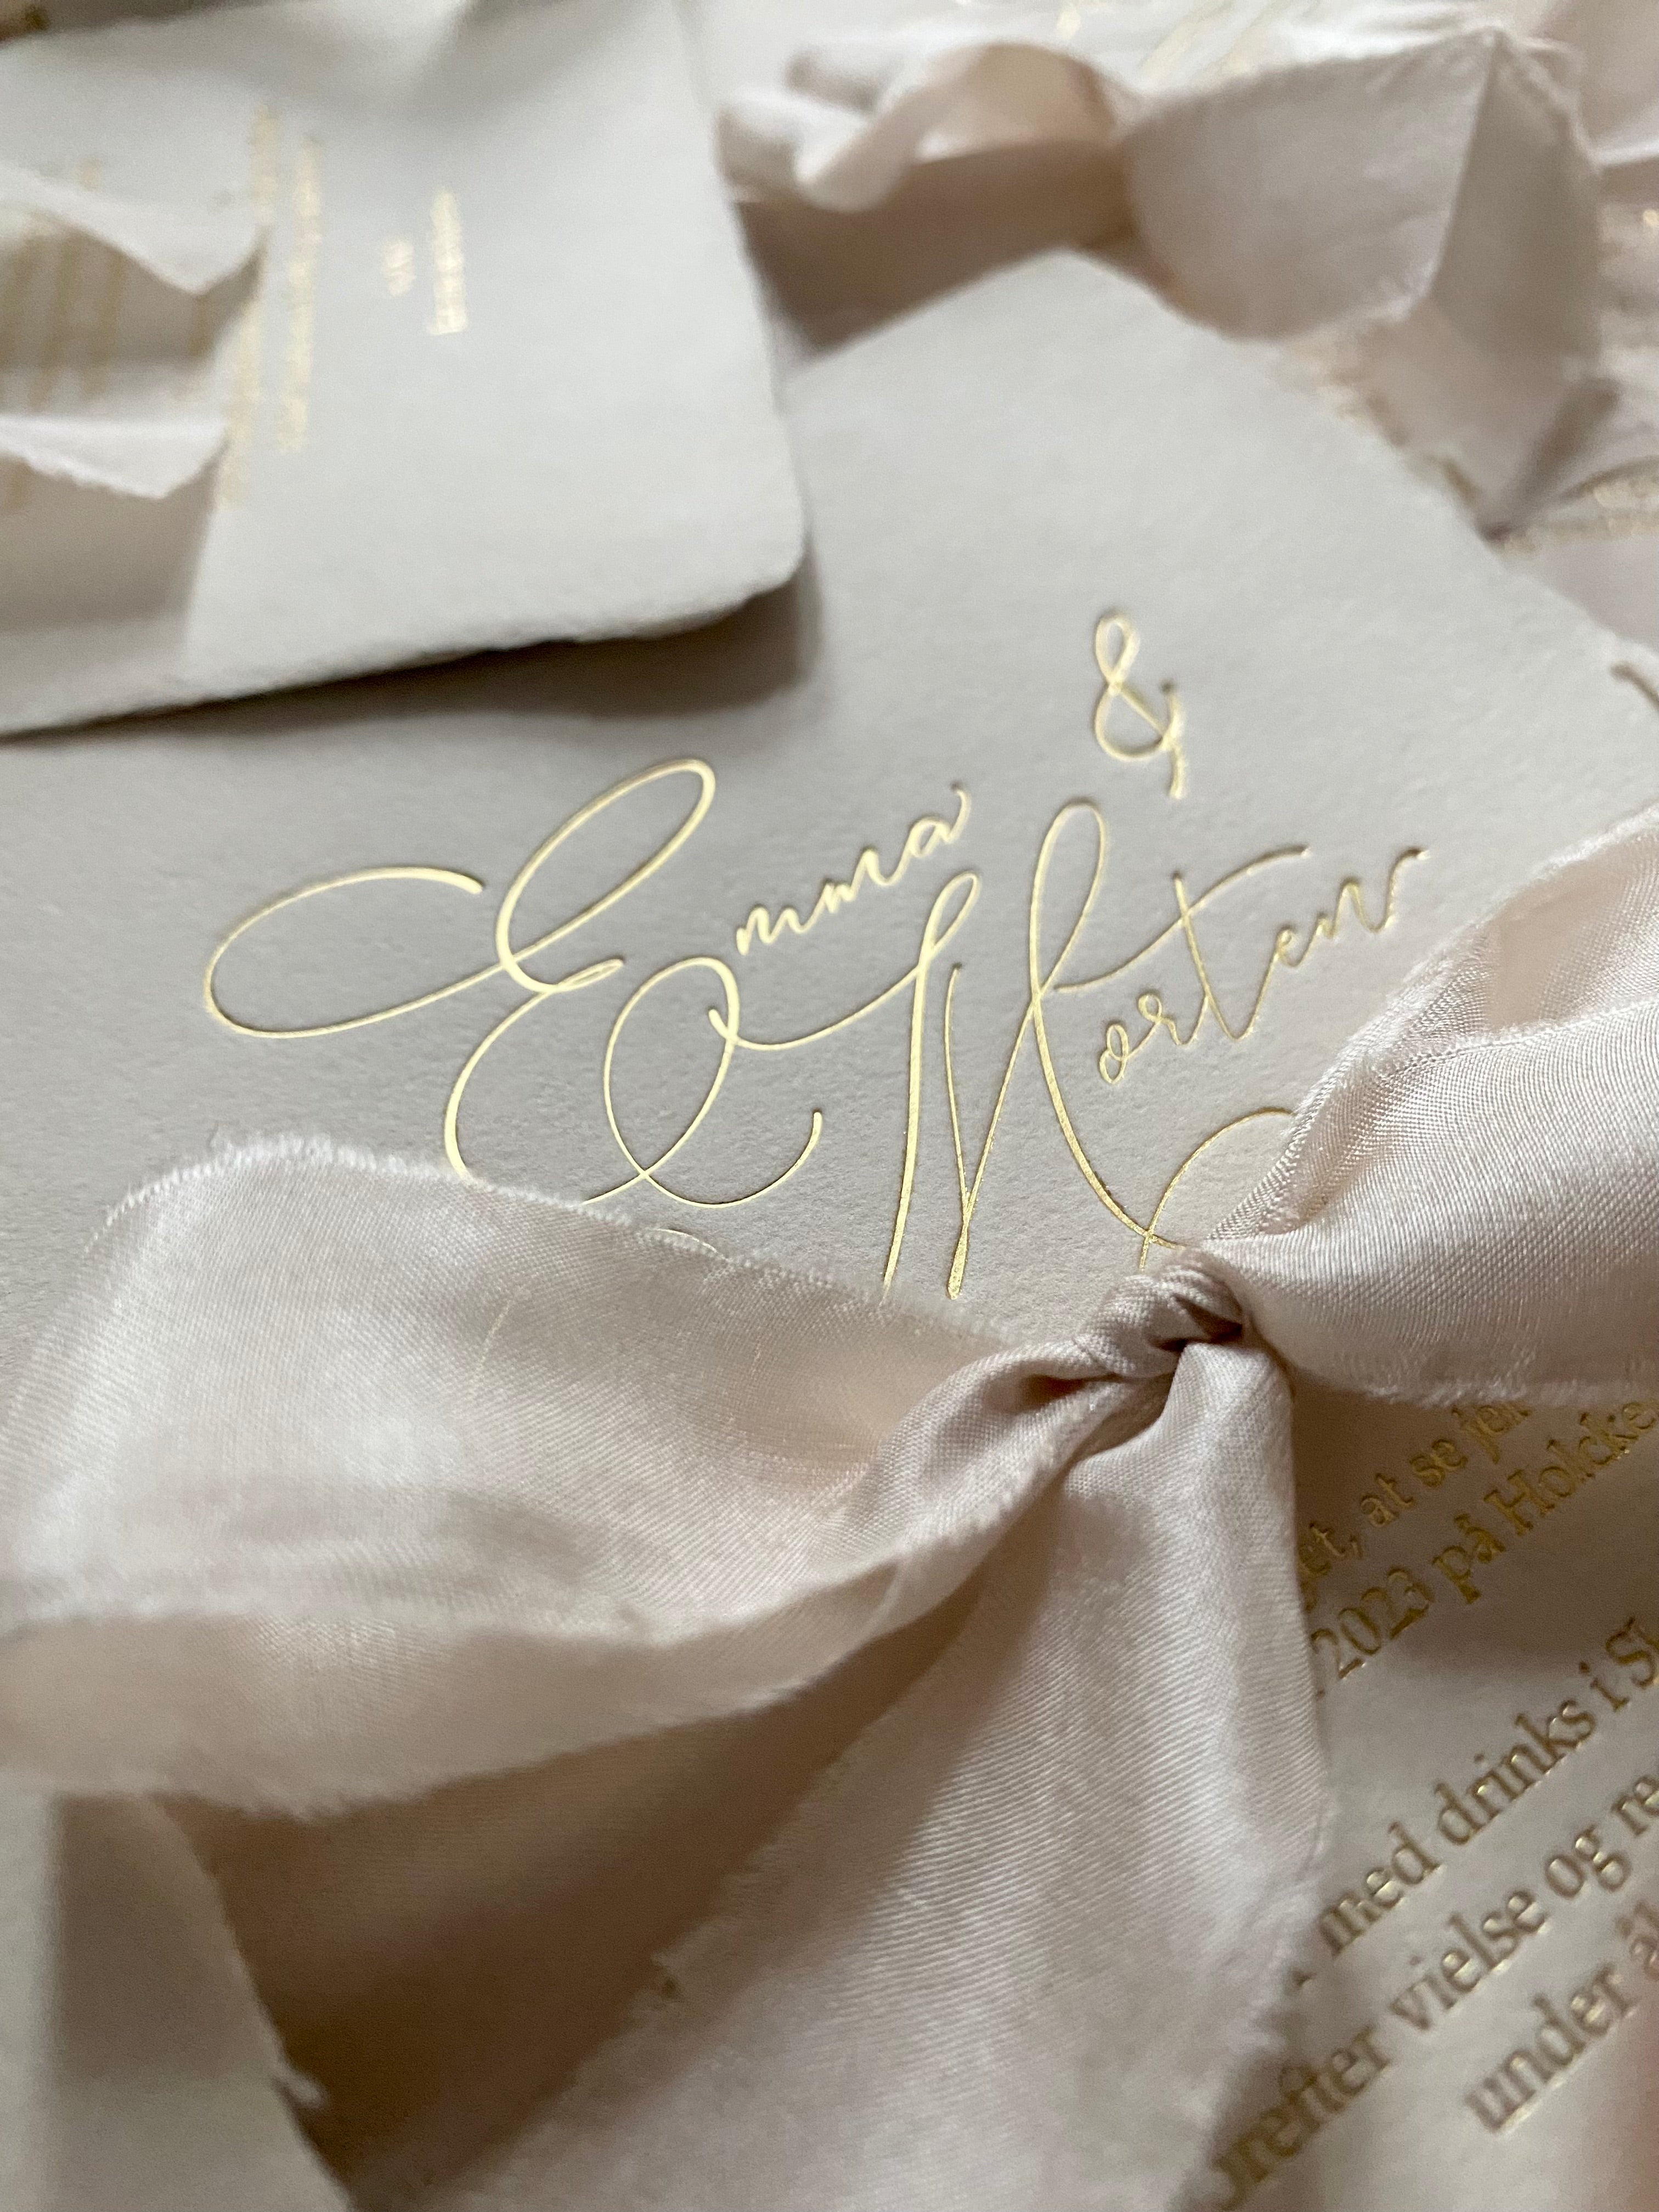 Discover the beauty of hot foil printing on handmade paper for your wedding stationery. Expert tips and inspiring examples await!